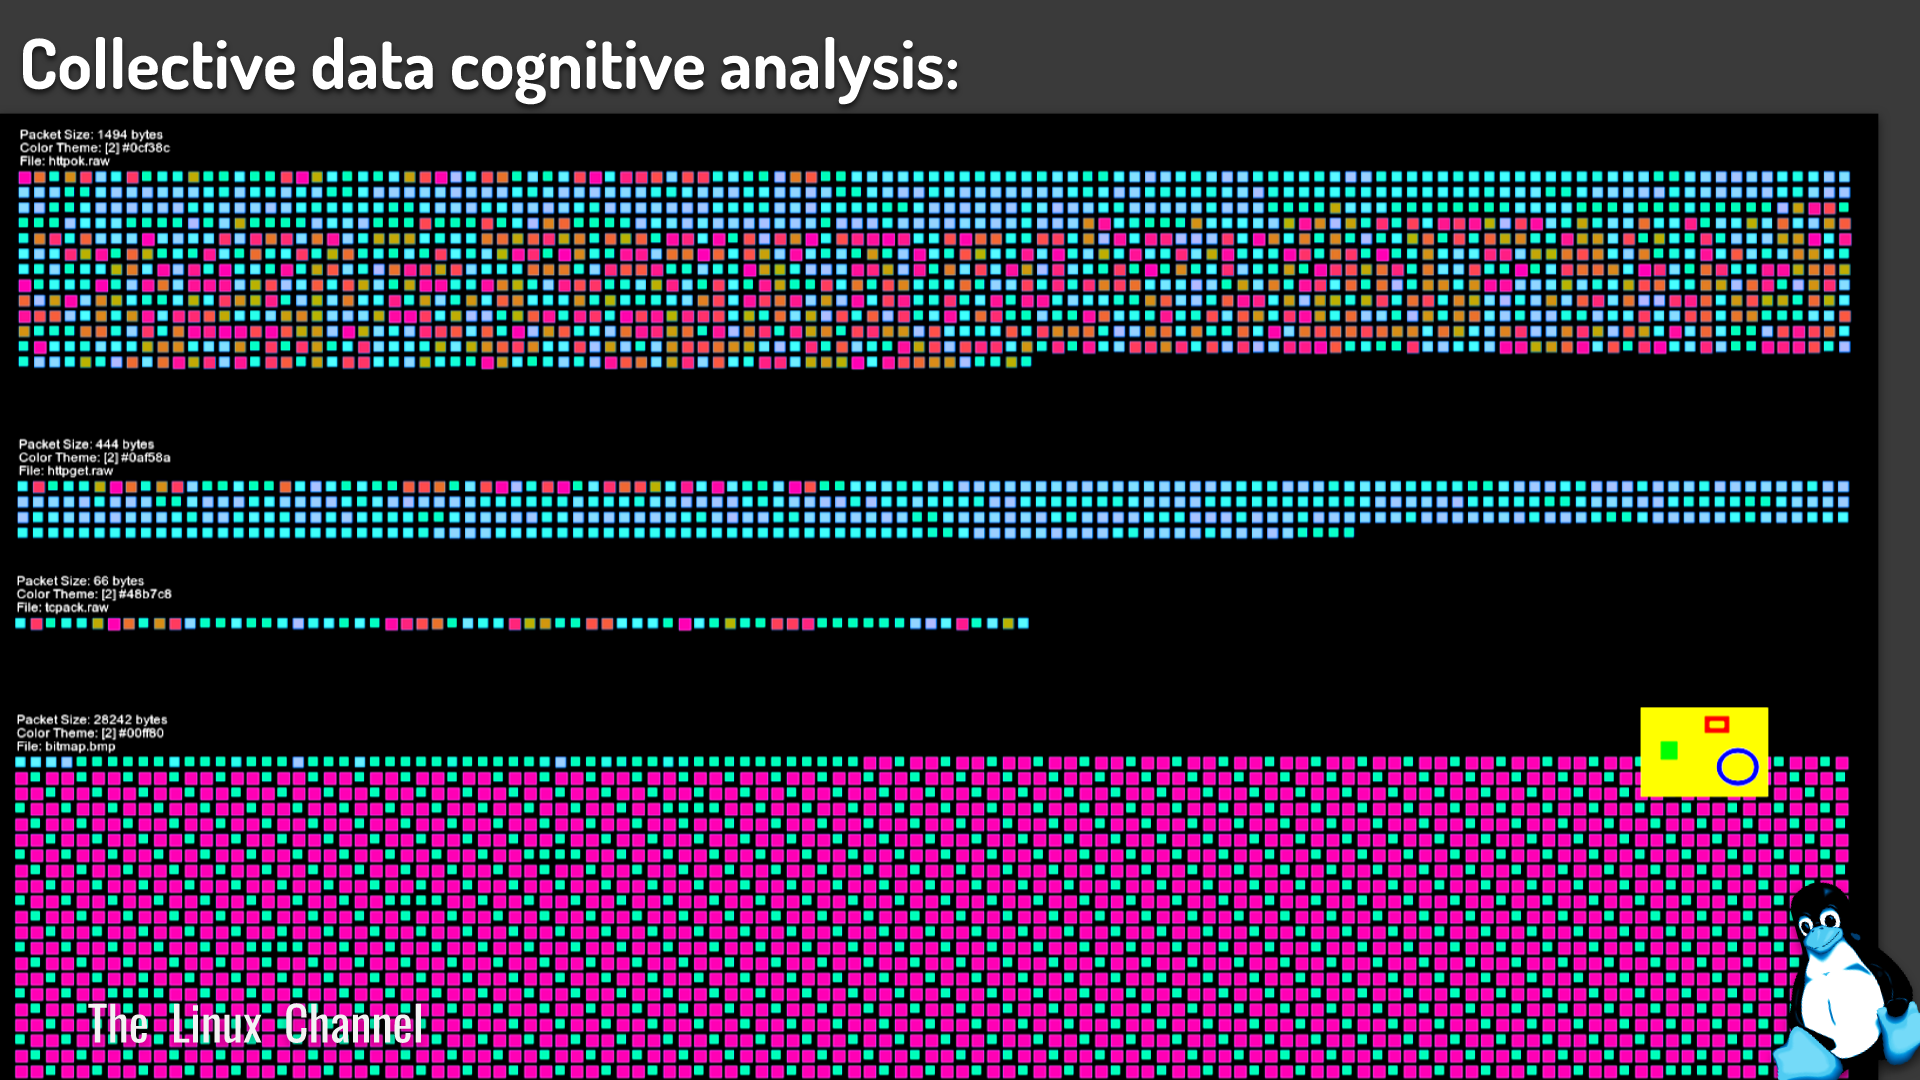 Collective data cognitive analysis